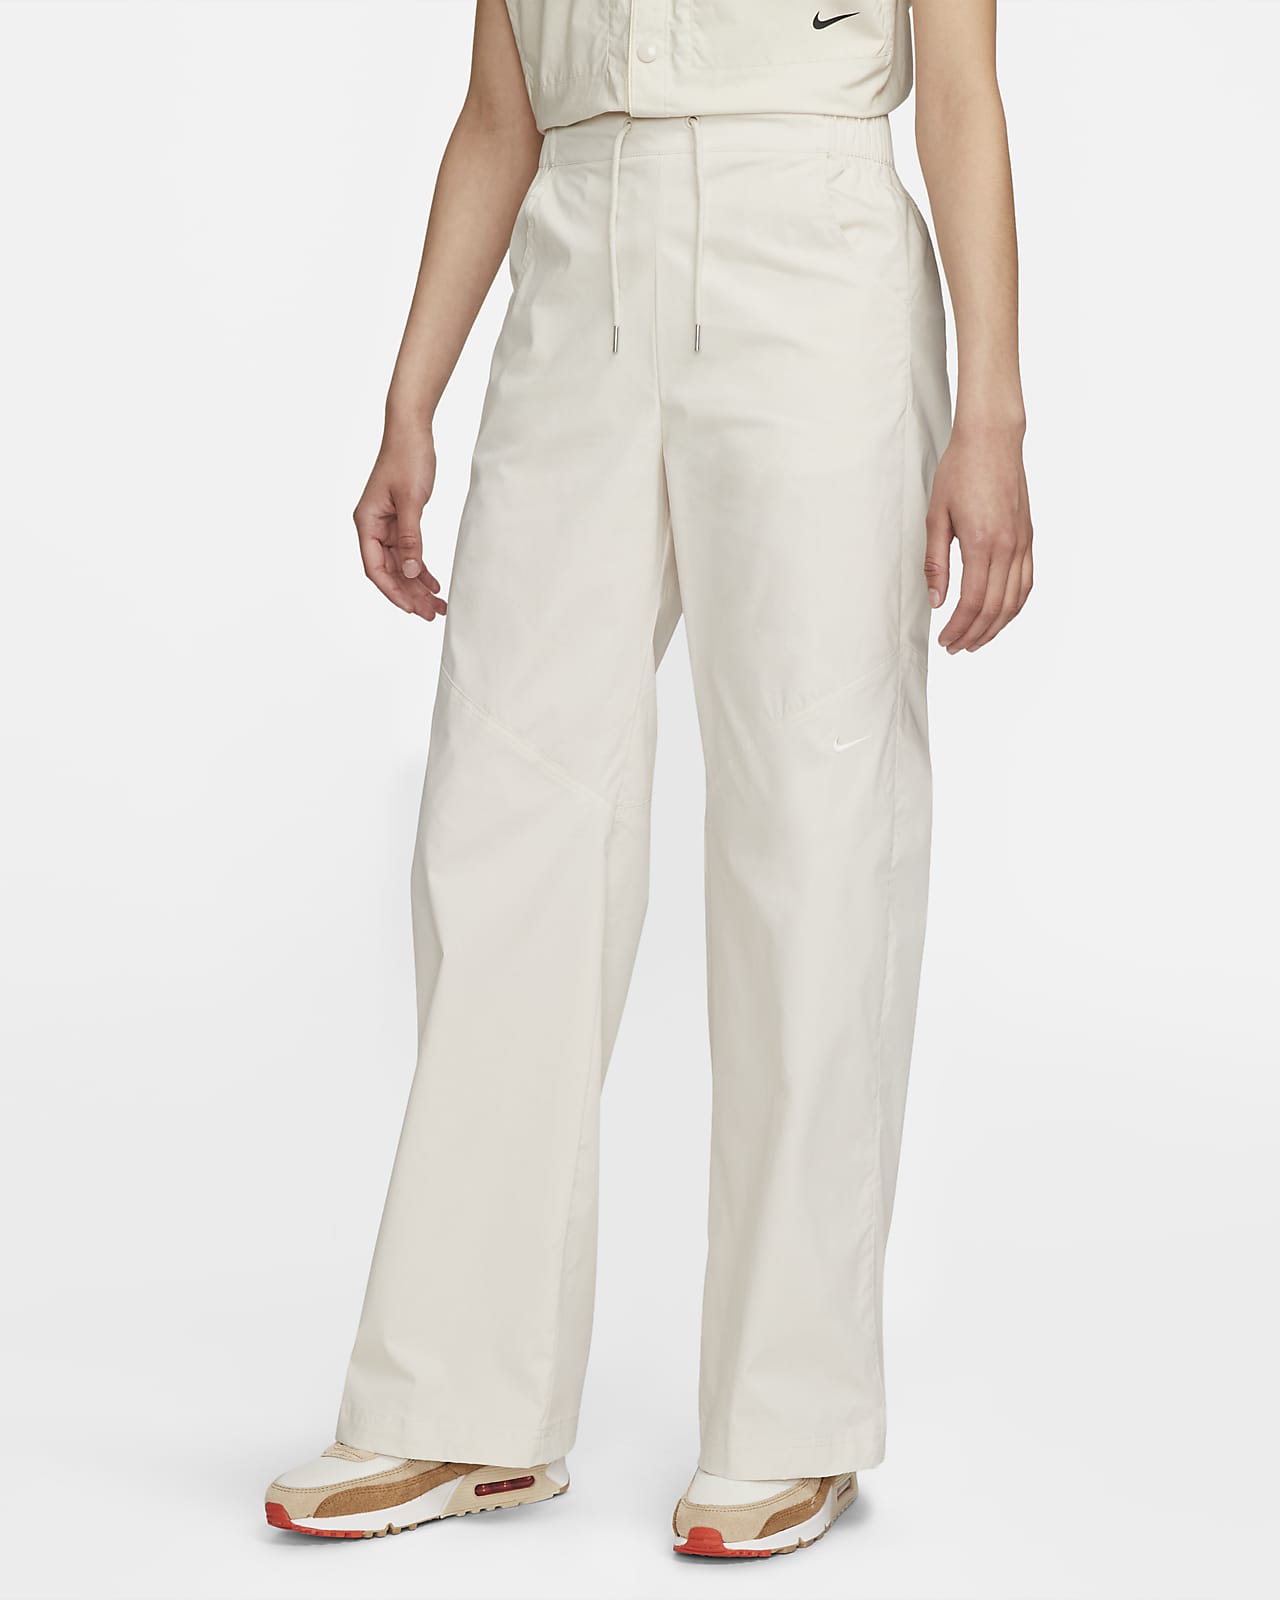 Essential Pull On Pant, Bottoms, Pants